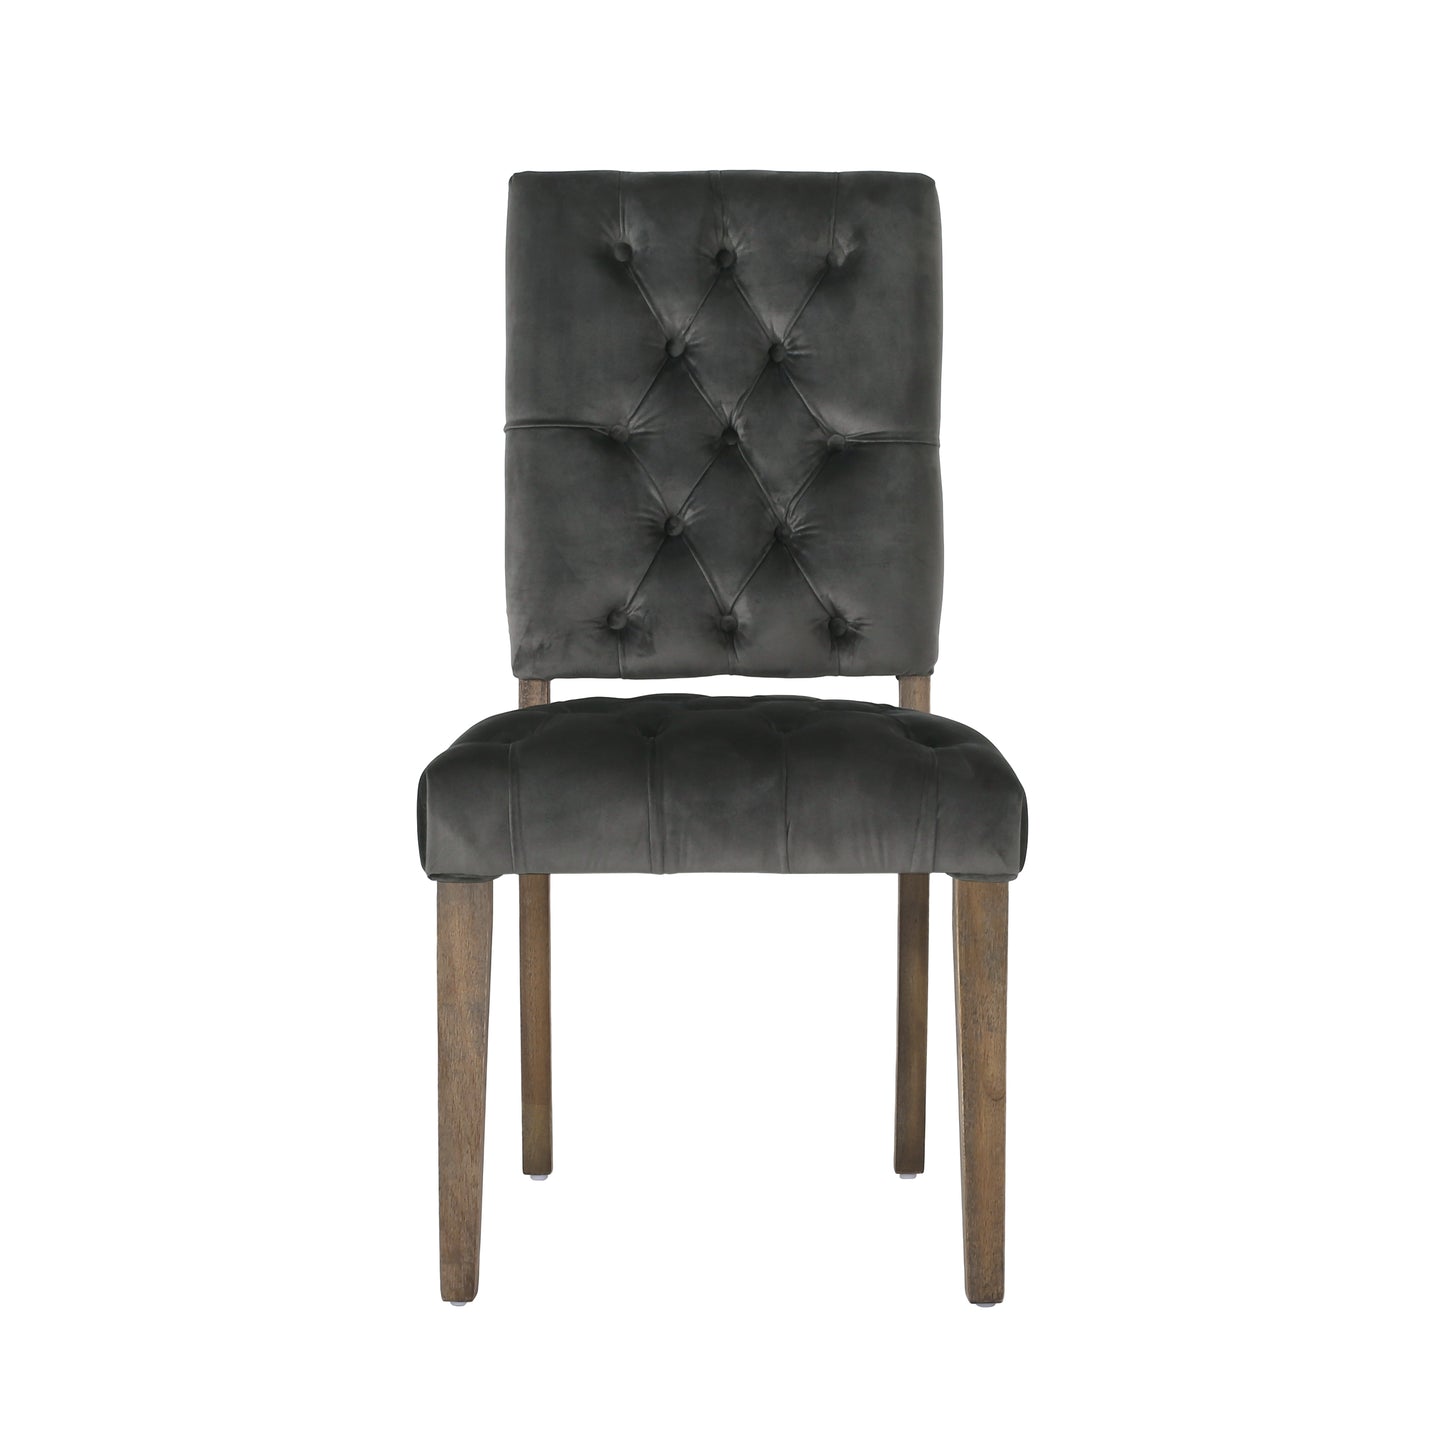 Myrtle Contemporary Velvet Tufted Dining Chairs (Set of 2)